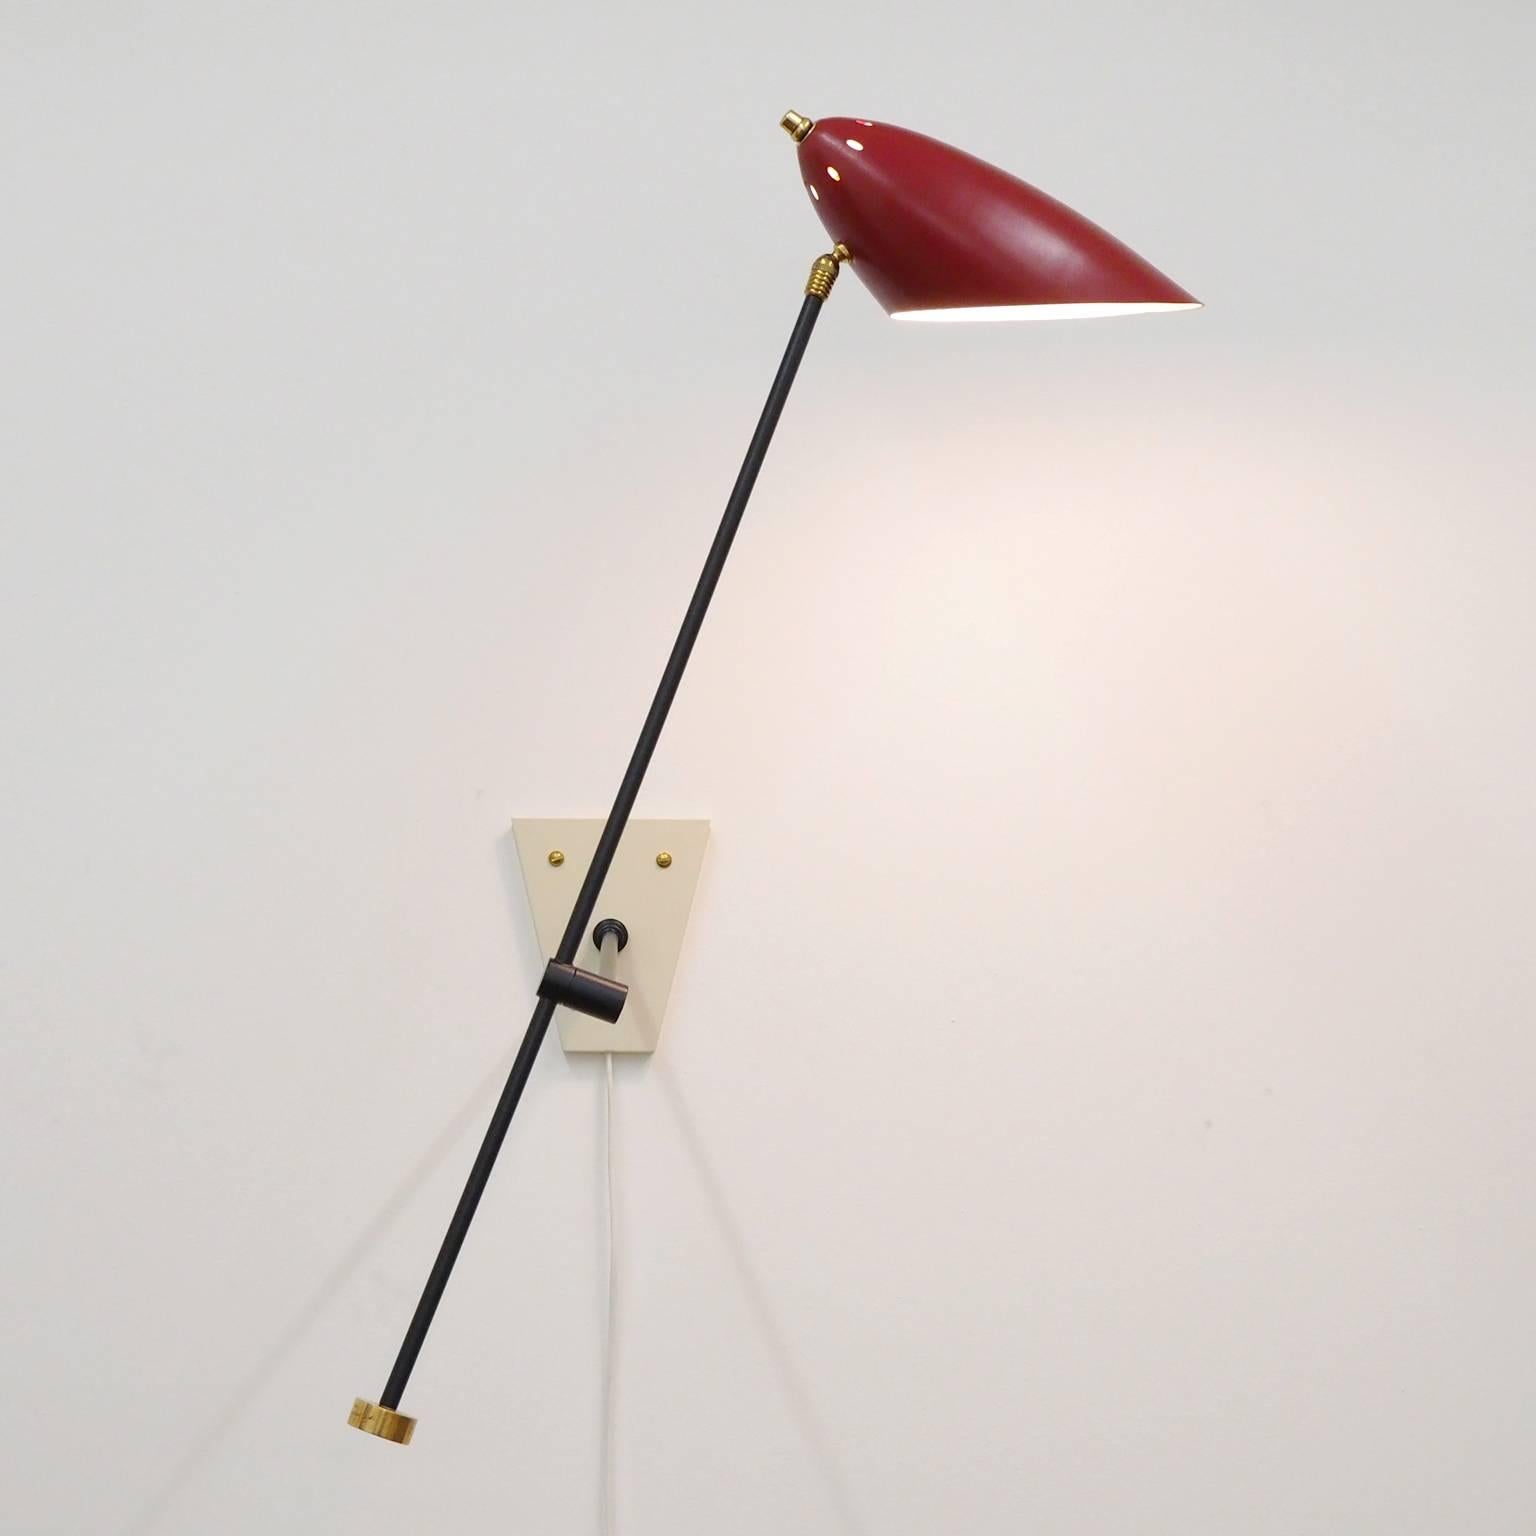 Excellent French modernist articulating wall lamp from the 1950s. Can be adjusted in numerous ways and positions for varying effects and uses. One original E27 socket with new wiring.
The dimensions in the listing are for the fully extended